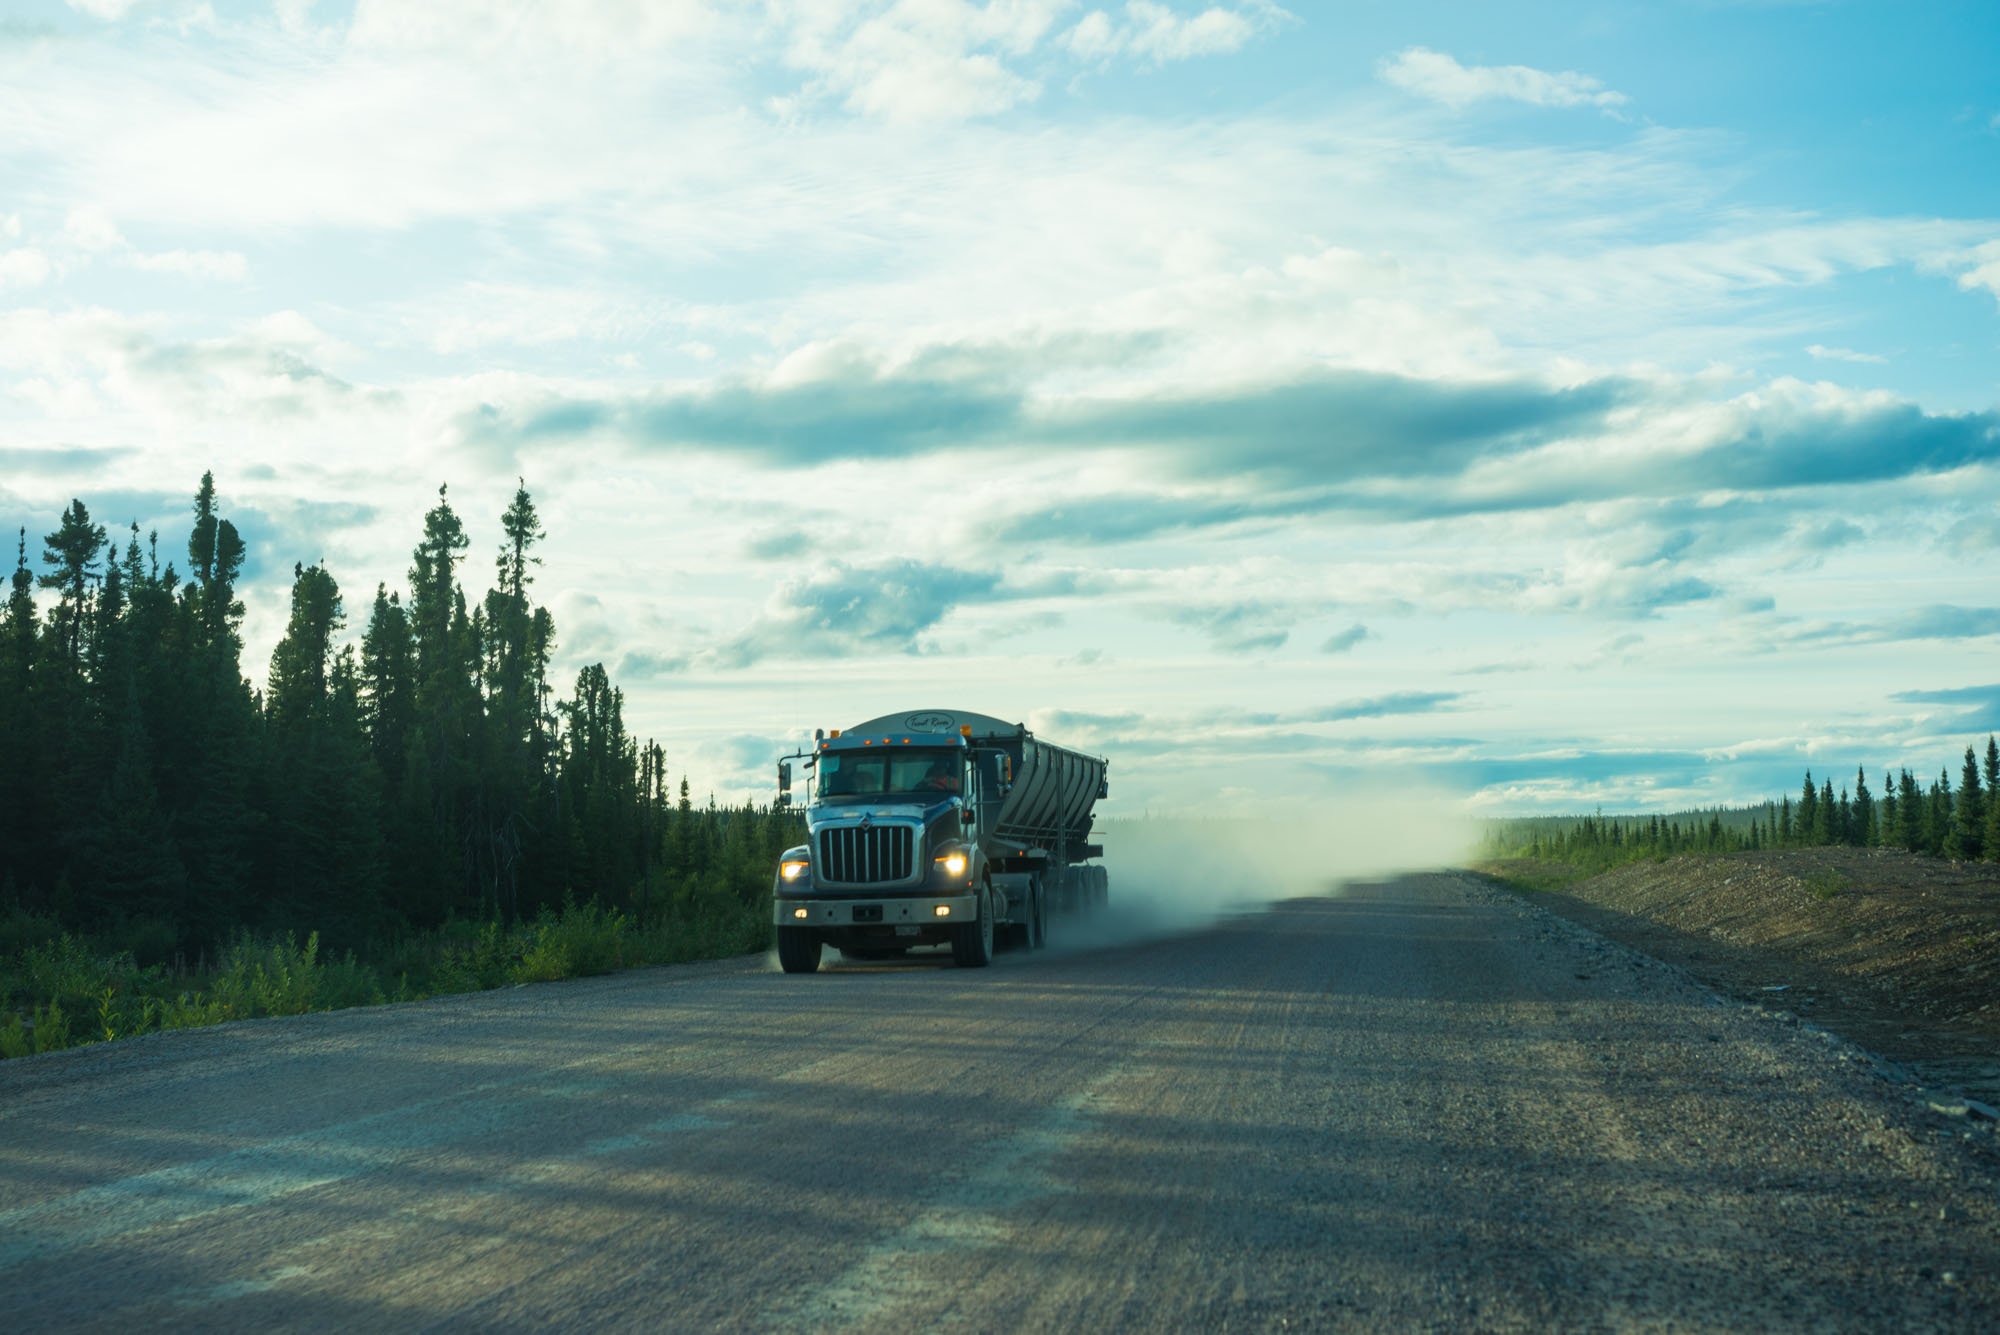  Construction vehicles were the only other people we would see on the Trans Labrador HWY 